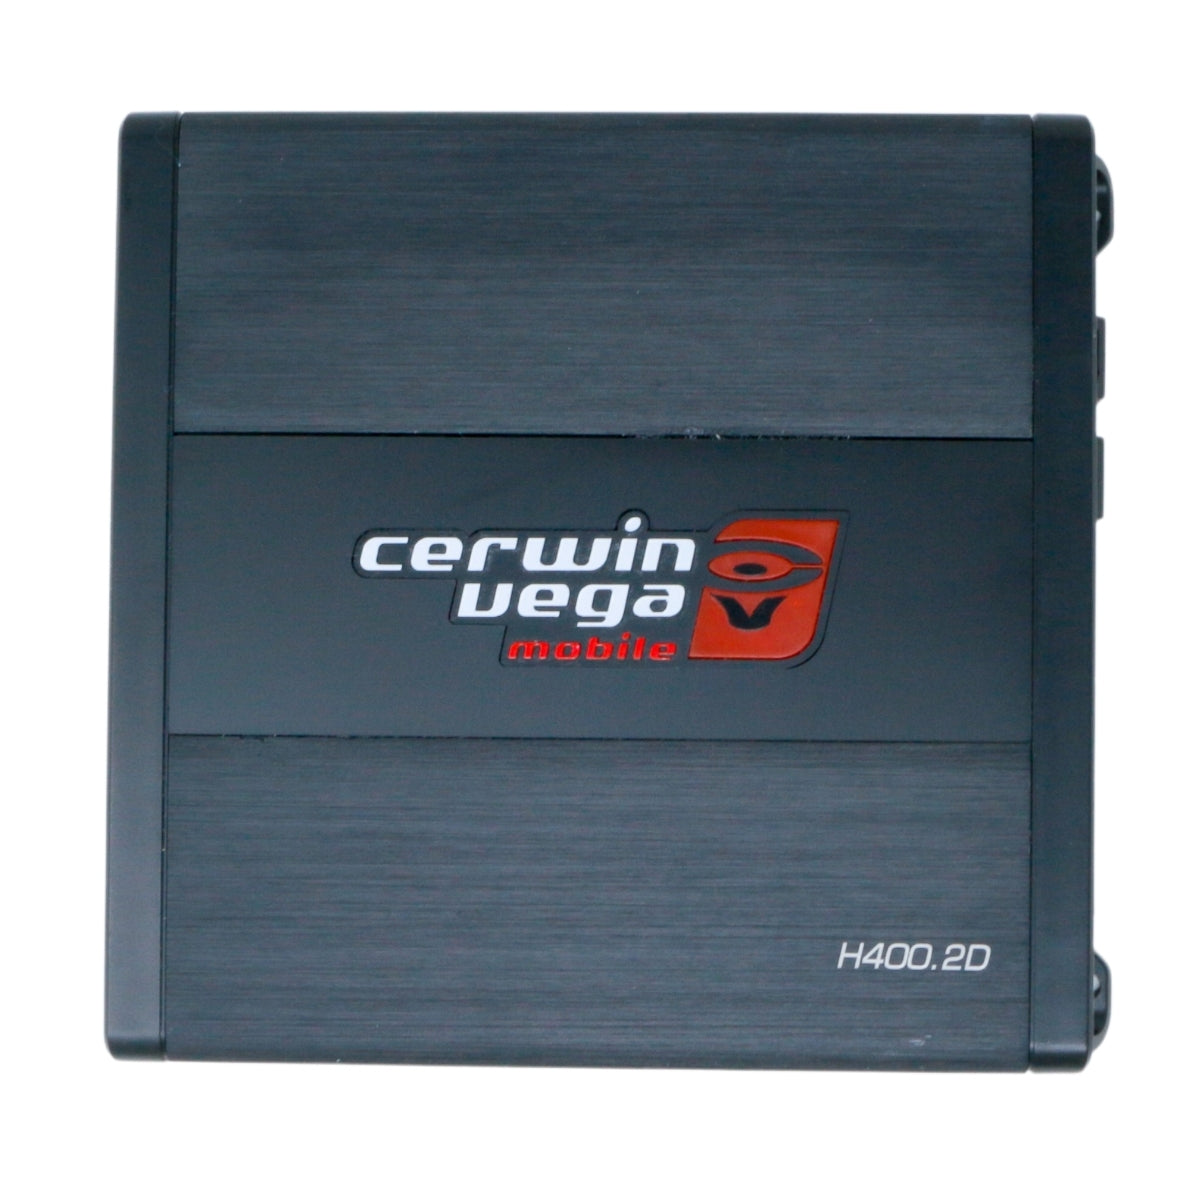 A Cerwin Vega car audio amplifier, model HED 290W RMS Full Range Class-D 2 Channel Digital Amplifier, in black with a sleek, rectangular design. The 2 Channel Full Range Digital Amplifier boasts 290W RMS power and features Bass Boost for enhanced sound quality. The brushed metal finish and side ports complete the look with red and white accents highlighting the Cerwin Vega logo.